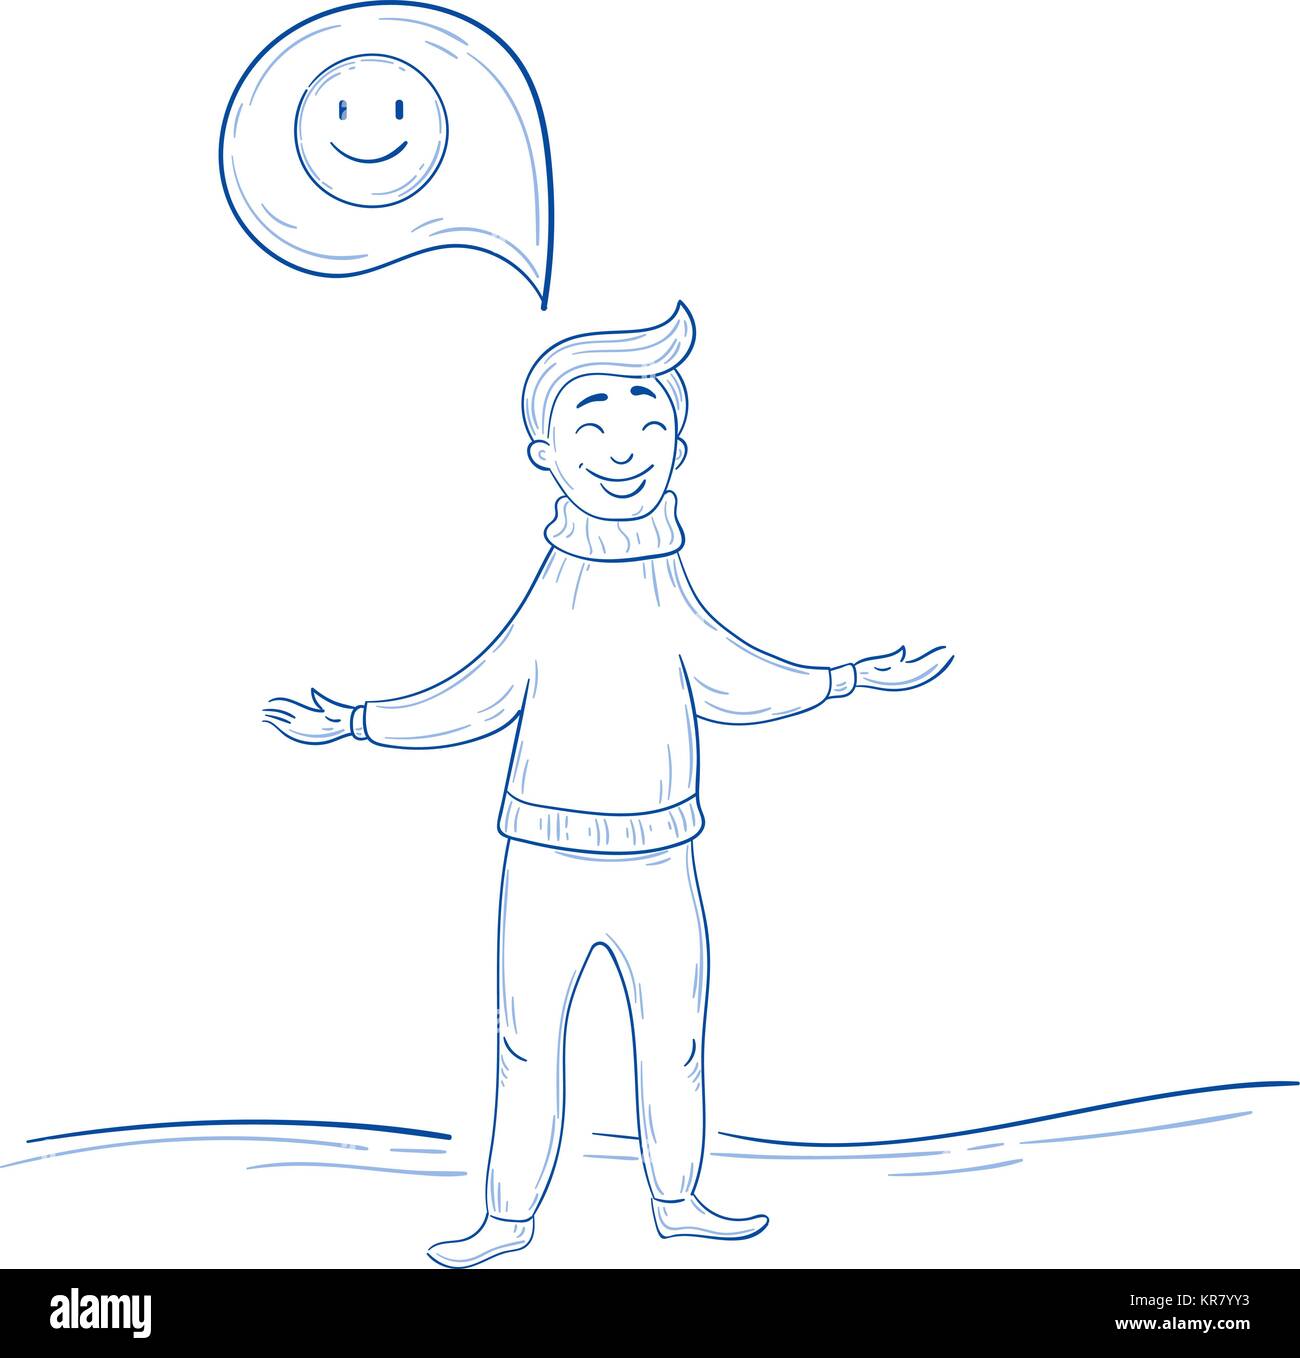 17600 Positive Thinking Drawing Images Stock Photos  Vectors   Shutterstock